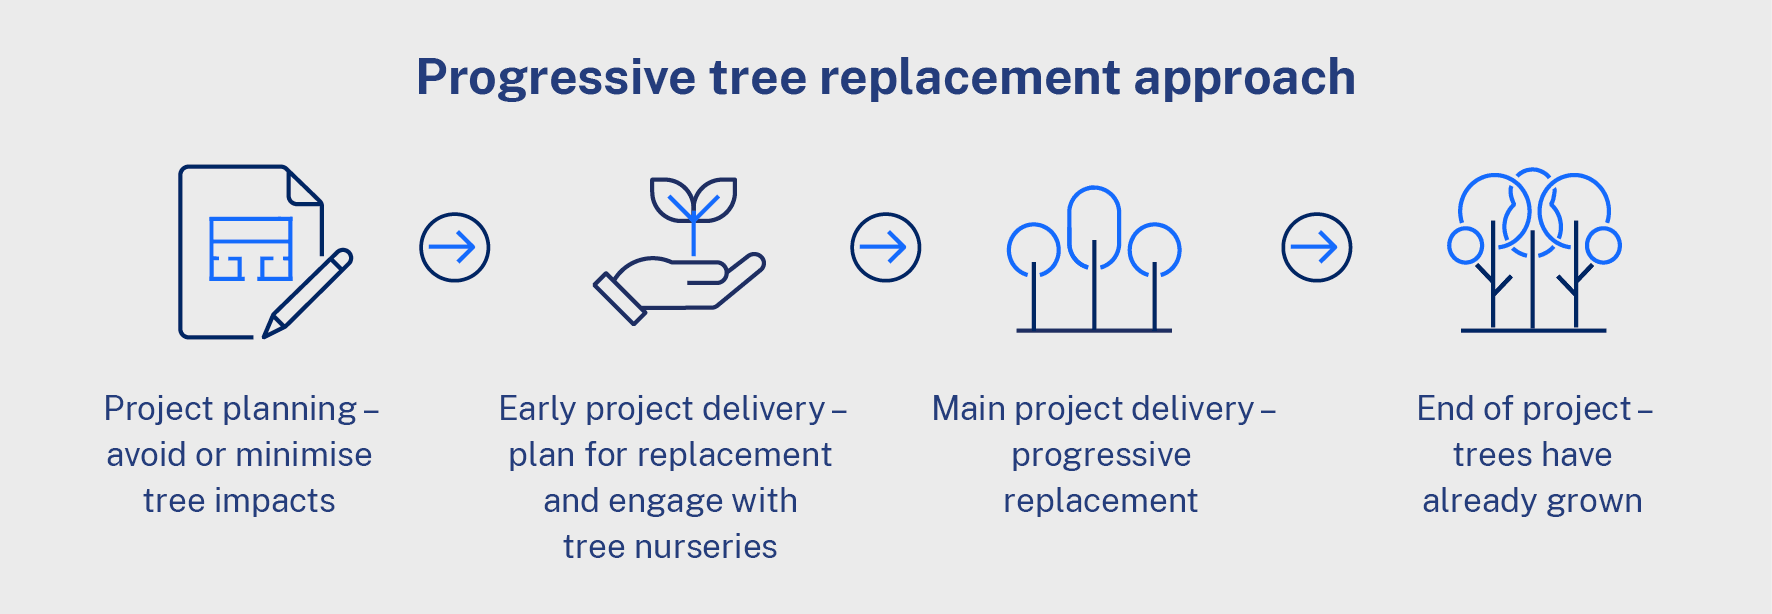 221109_Tree-Replacement-infographic_v2